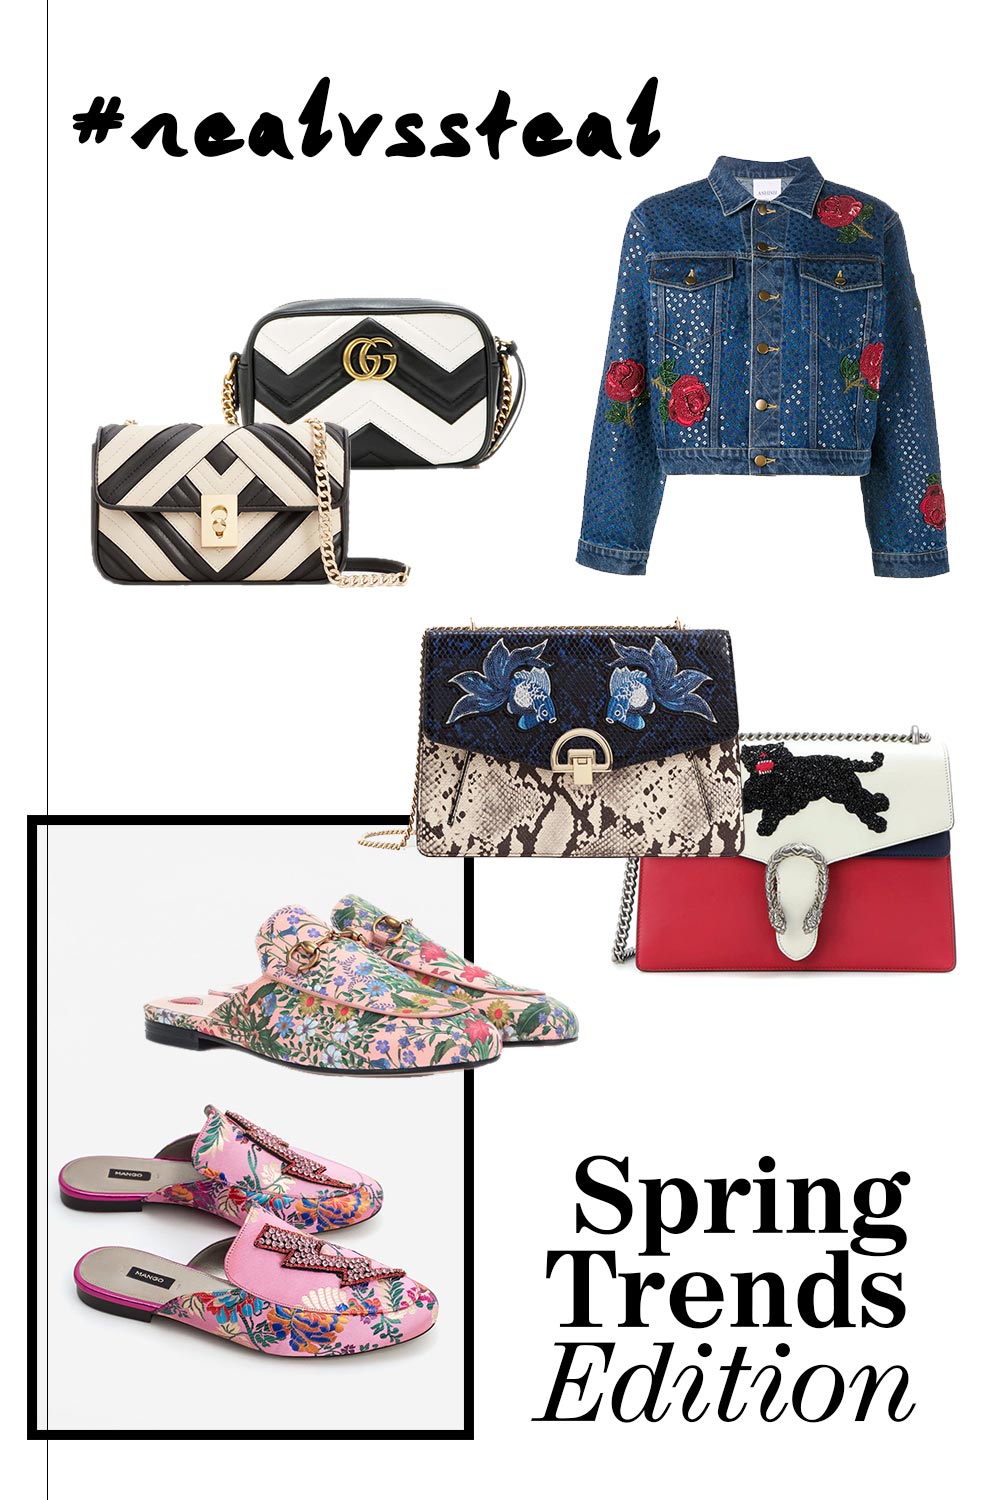 Real vs Steal, Spring Trends, Gucci Slipper, Gucci Bags, Gucci Jackets, Chanel Bags, Dupes, Lookalikes, Designer Dupes, Fashion Blog, Style Blog, www.whoismocca.com